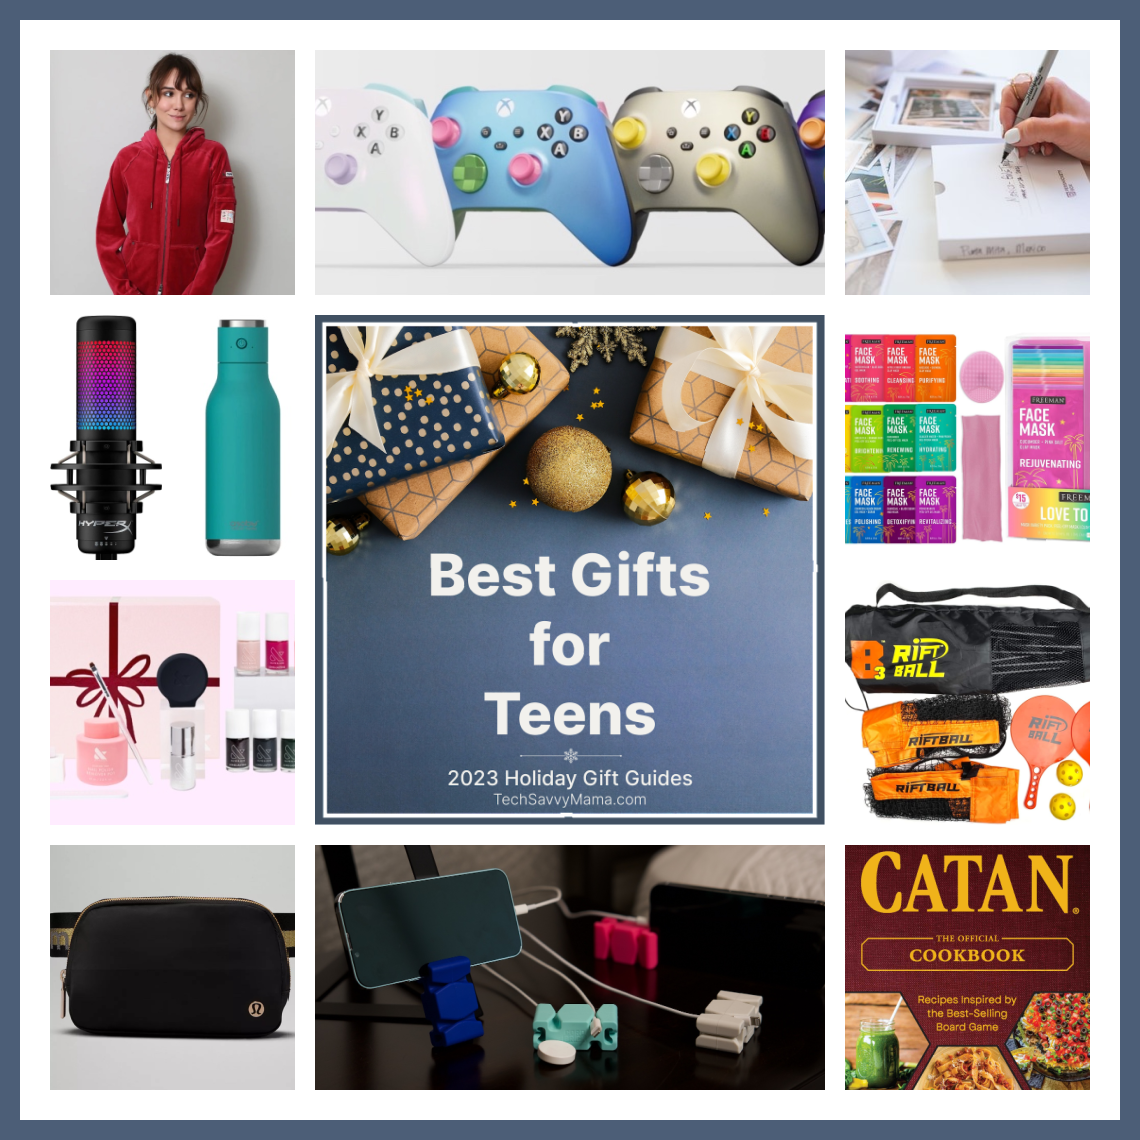 https://techsavvymama.com/wp-content/uploads/2023/11/Best-Gifts-for-Teens-1.png